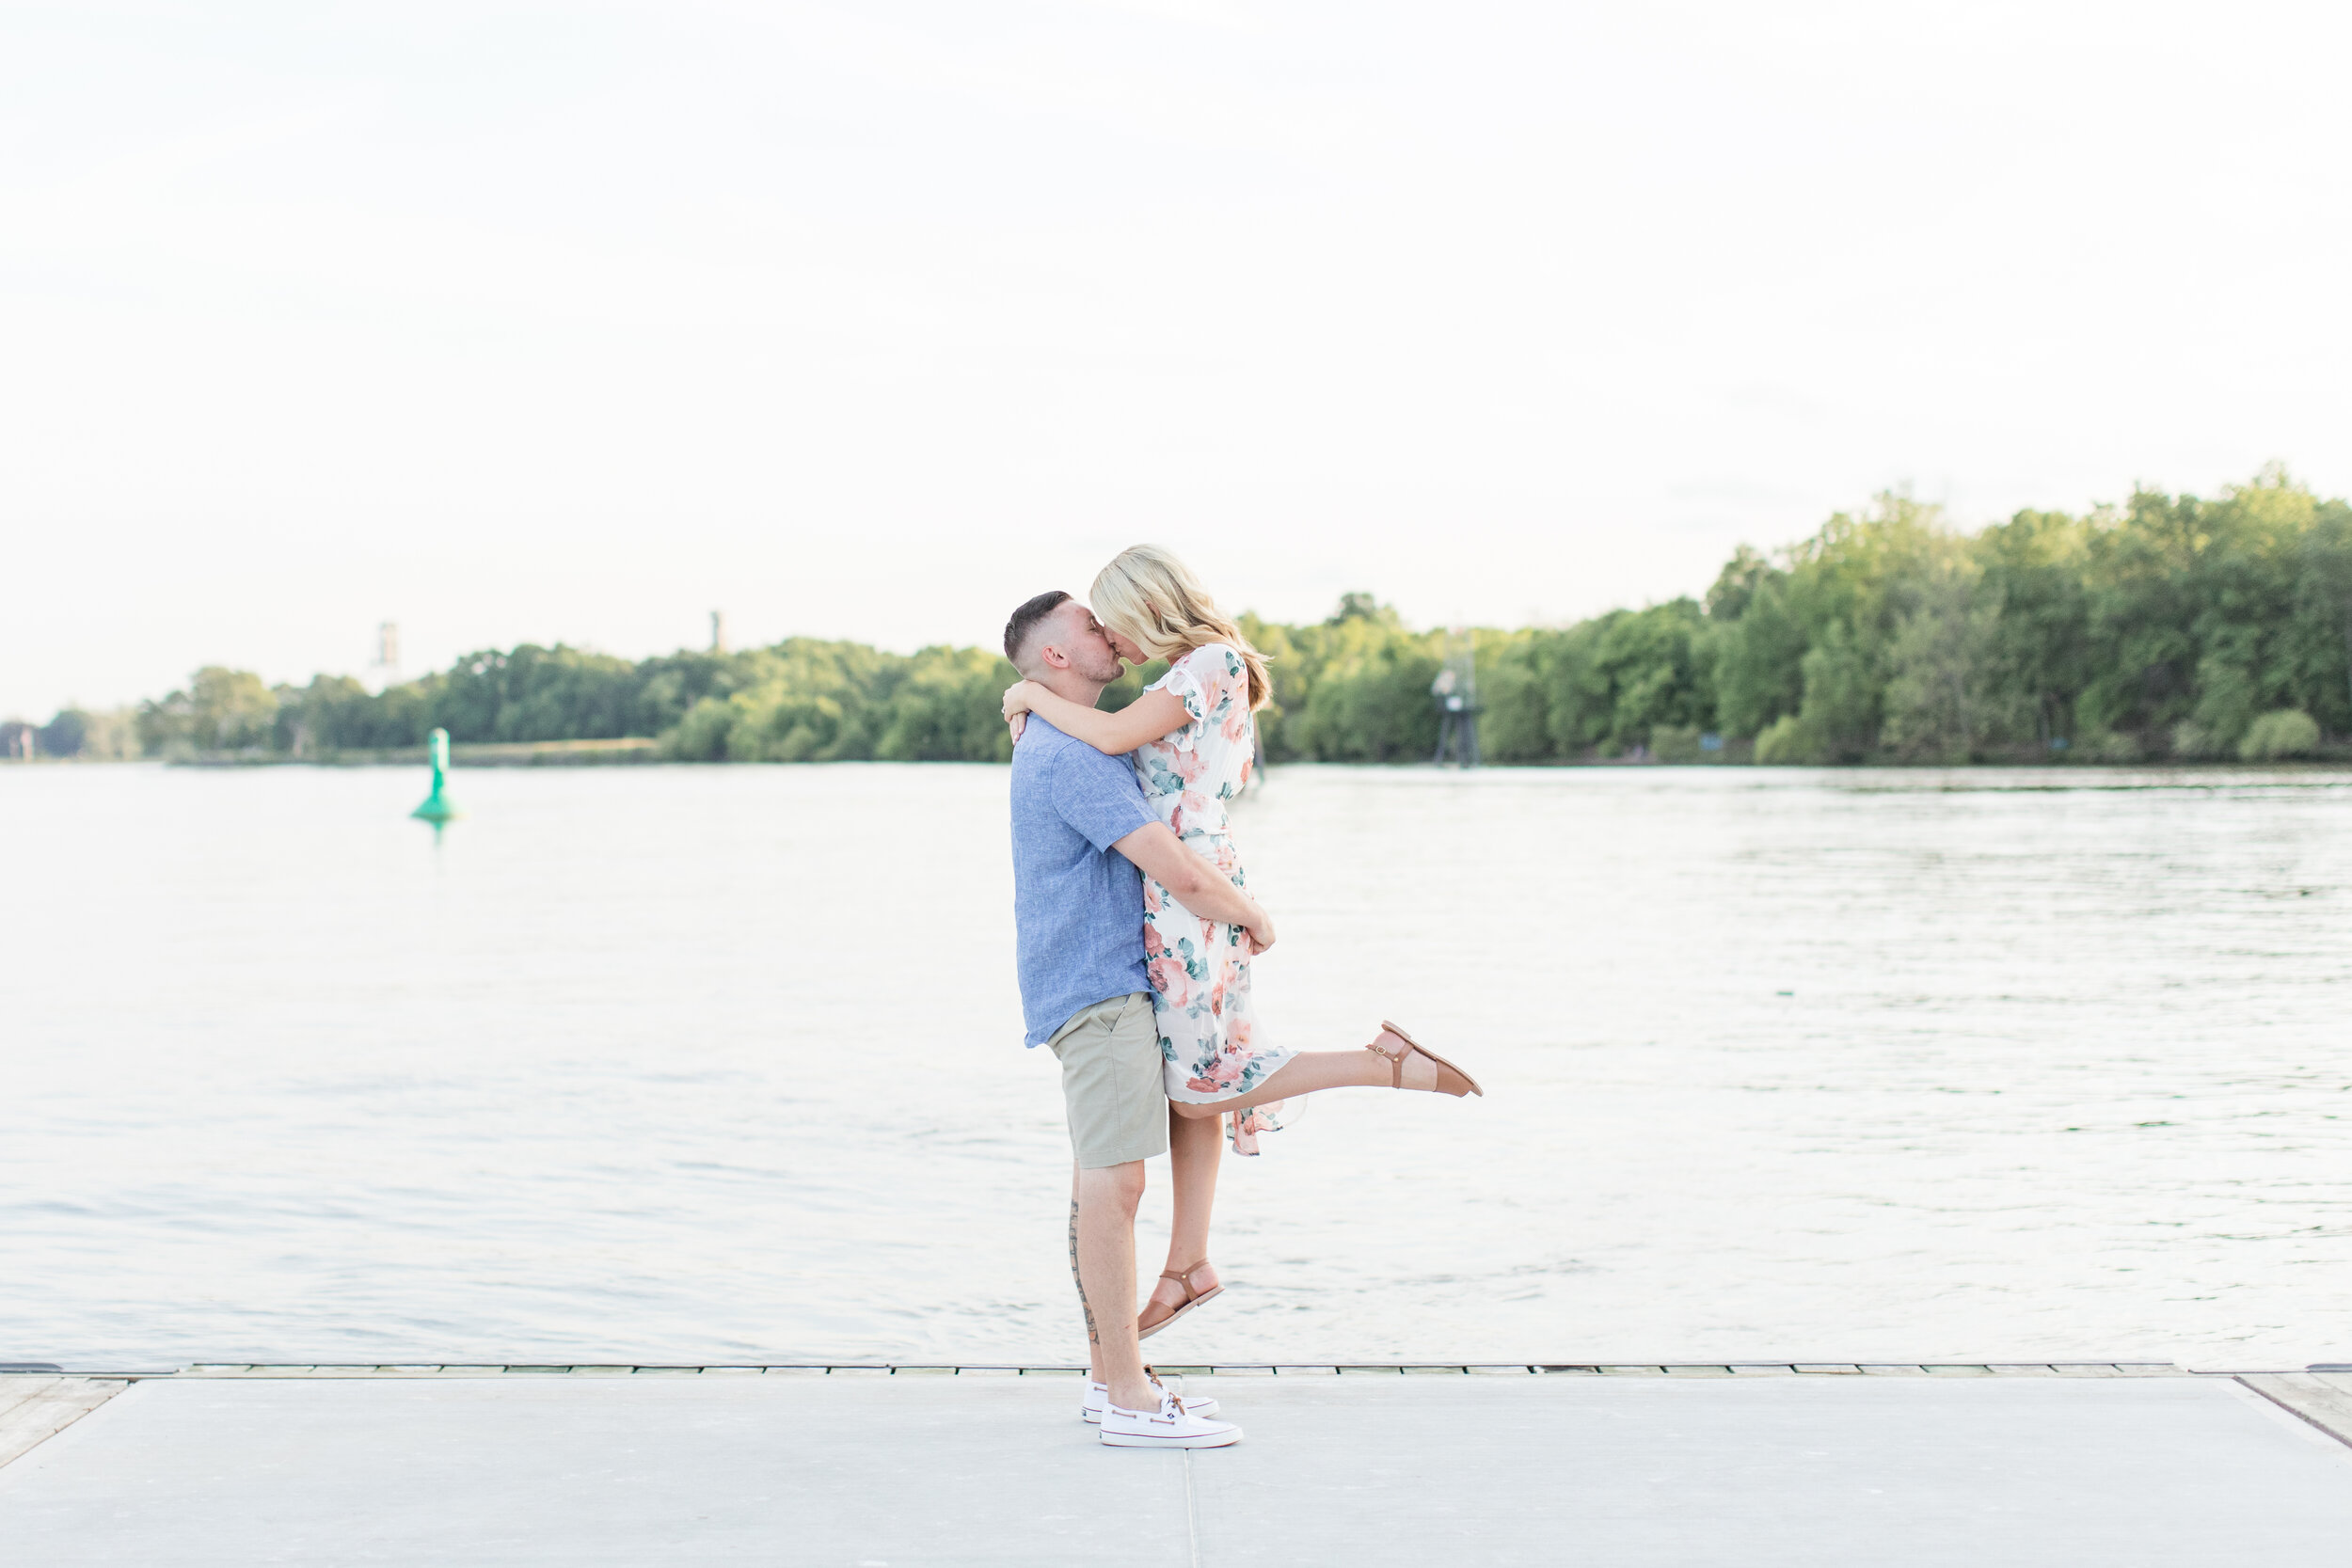 Located just outside of Philadelphia, The Bristol Waterfront Park was the perfect location for Brittany and Tom’s Engagement session photographed by Kelly Pullman photography.